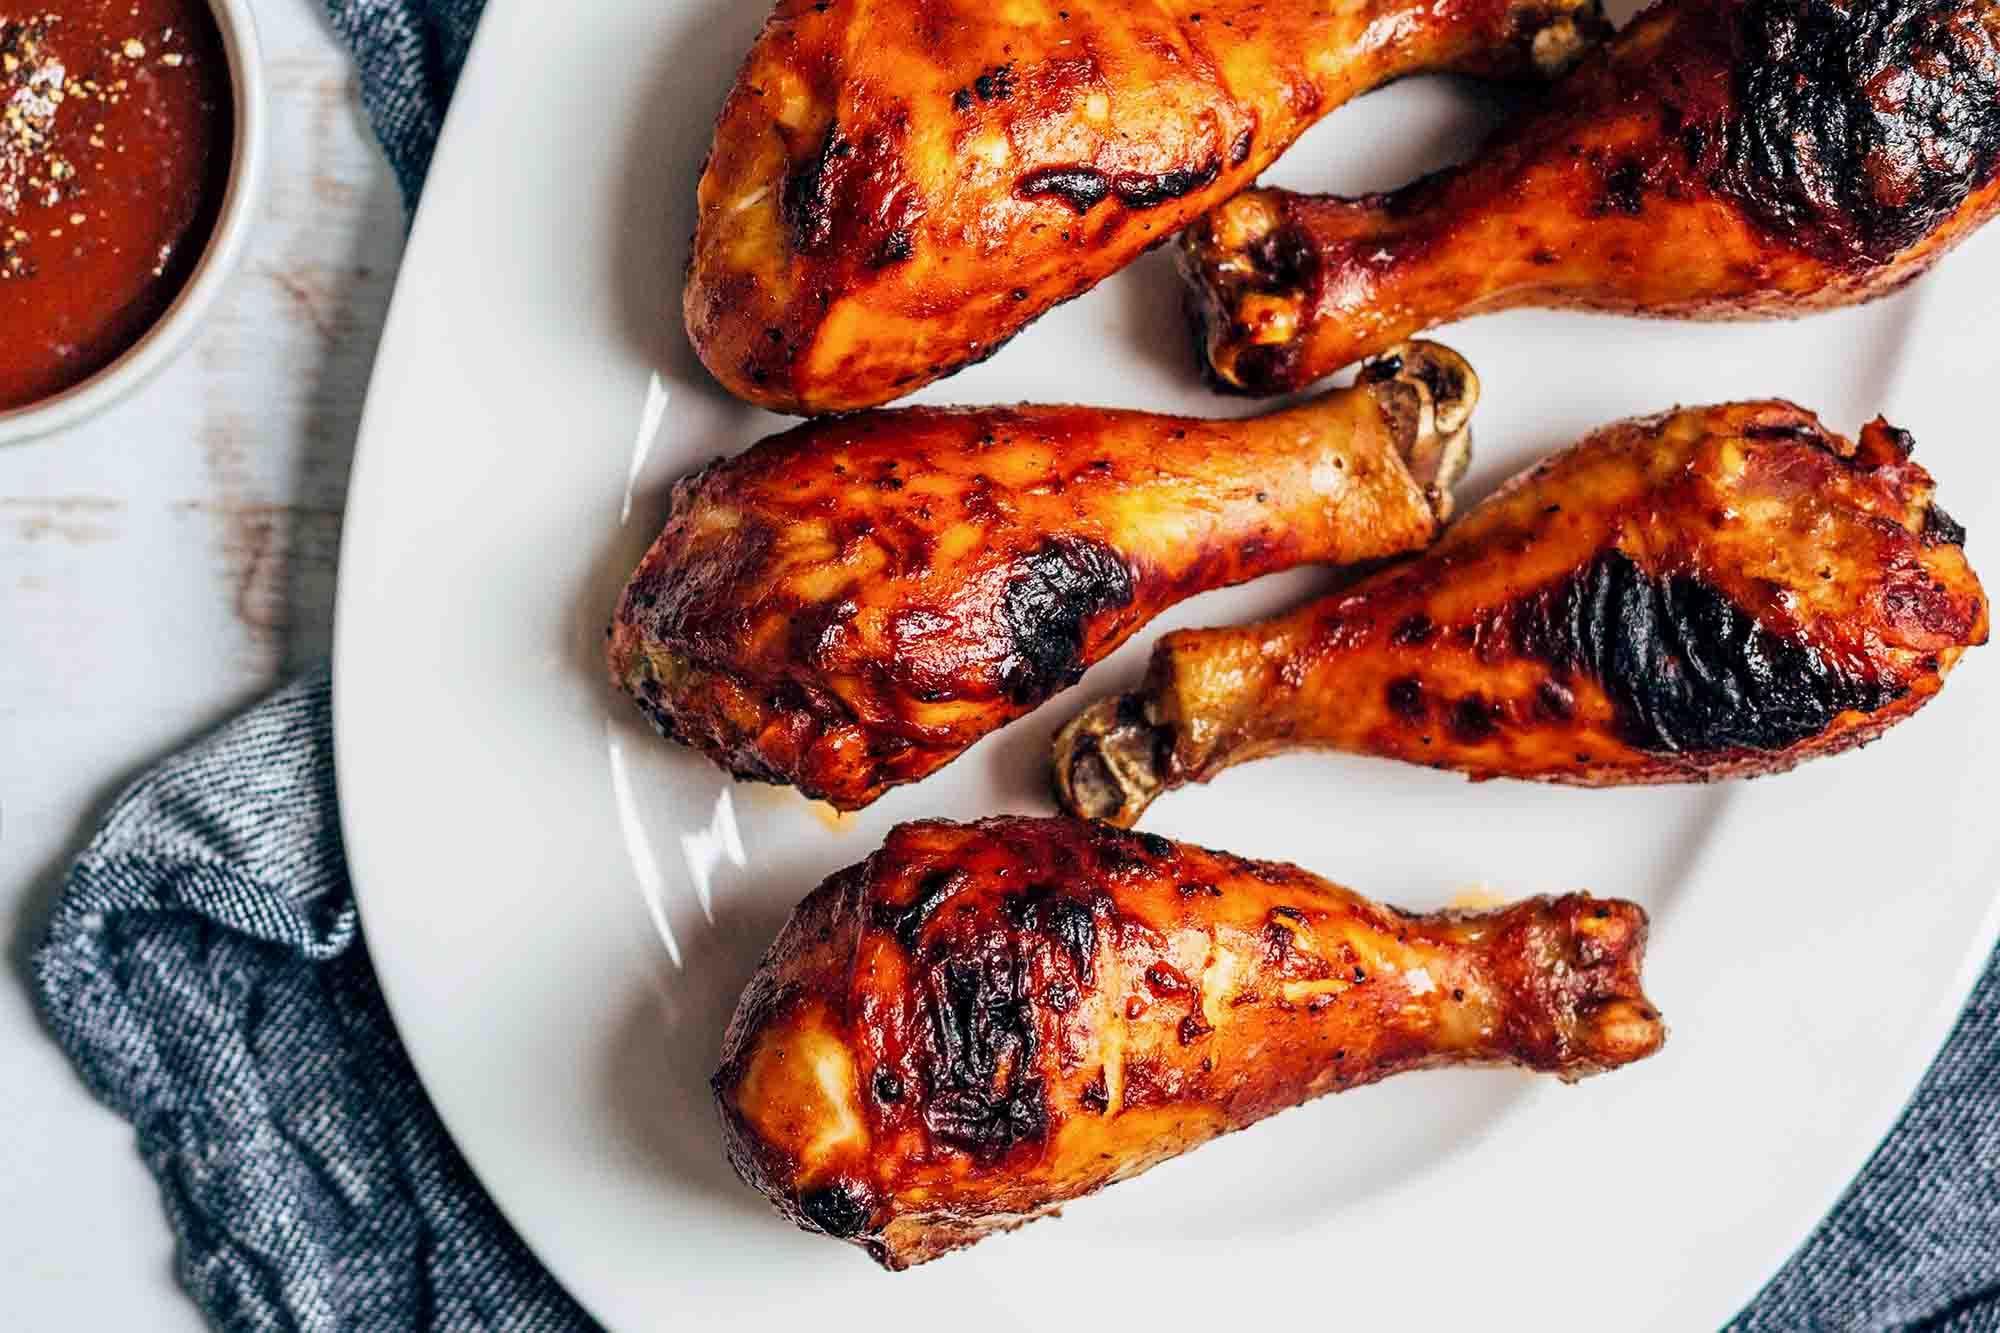 Bbq Chicken Legs In Oven
 Easy BBQ Chicken in the Oven Recipe